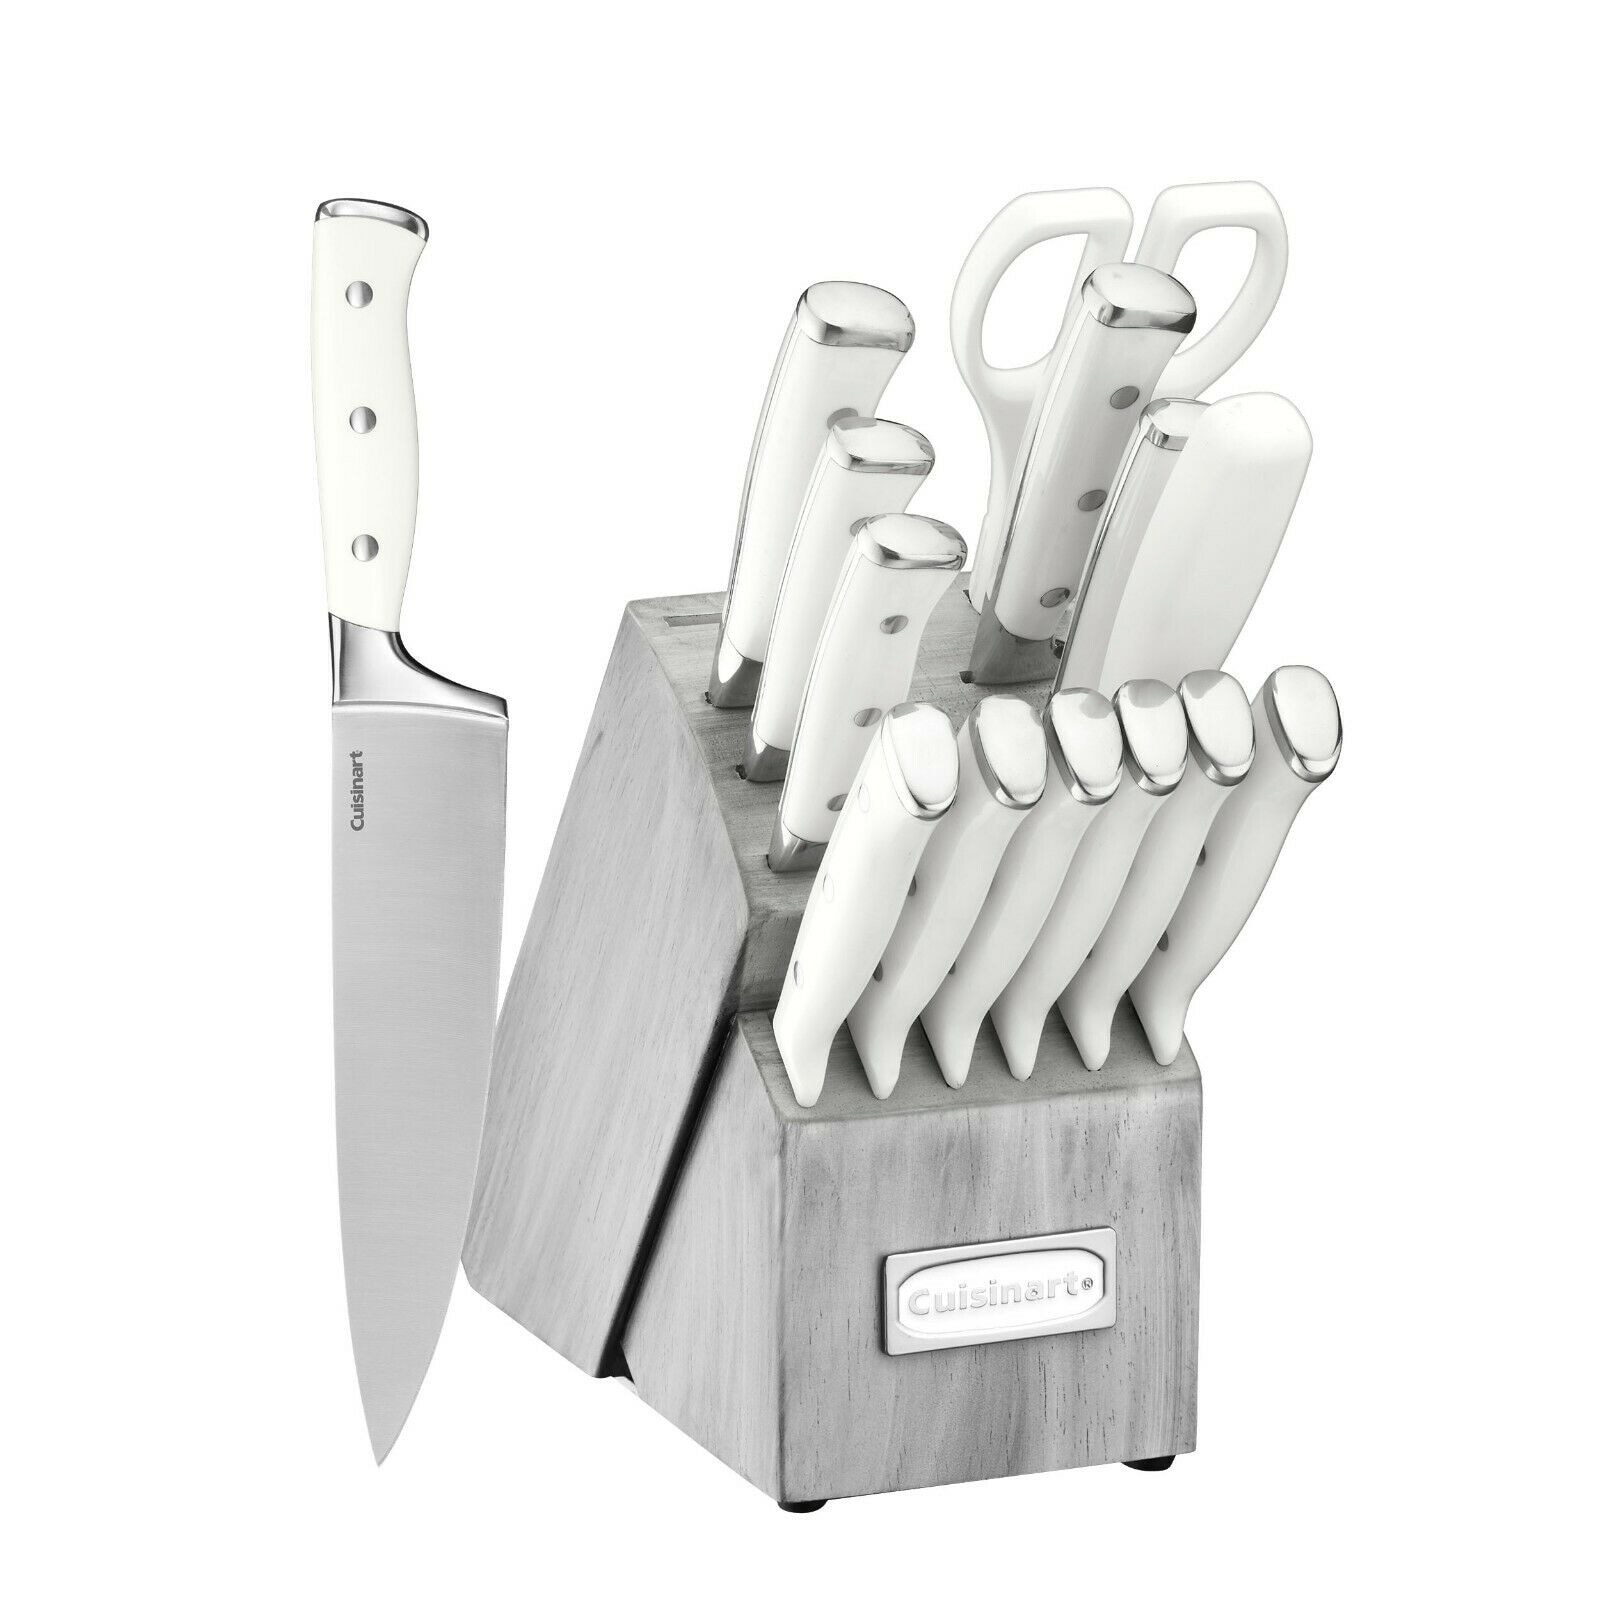 https://ak1.ostkcdn.com/images/products/is/images/direct/44a5d95d212ba09a4f8a71d09300acbb419c9bfd/Cuisinart-Triple-Rivet-Collection-15-Piece-Cutlery-Block-Set%2C-White-Grey.jpg